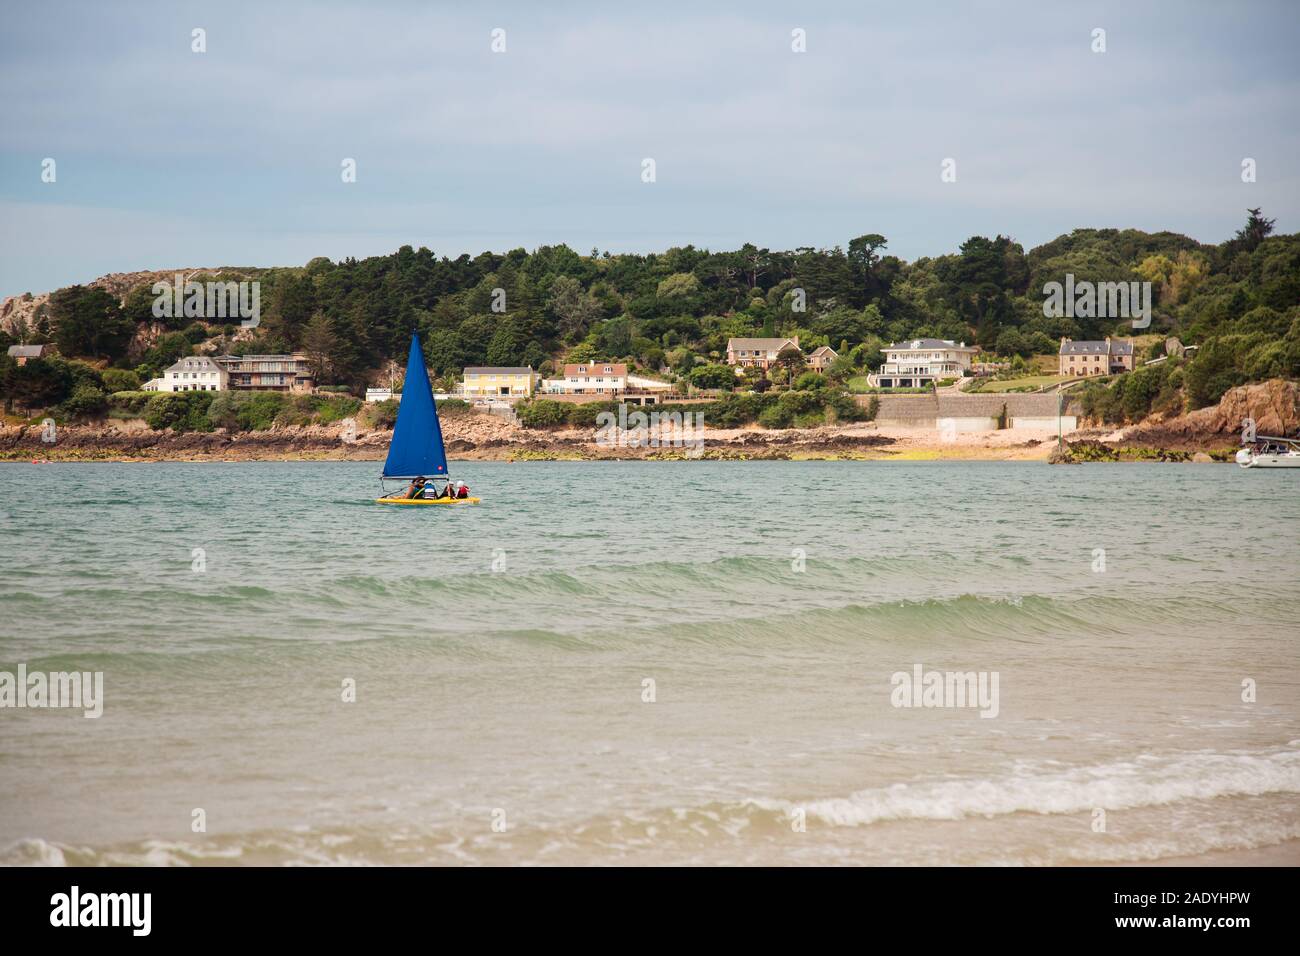 Sailing boat (dinghy) on the coast of Jersey, Channel Islands Stock Photo